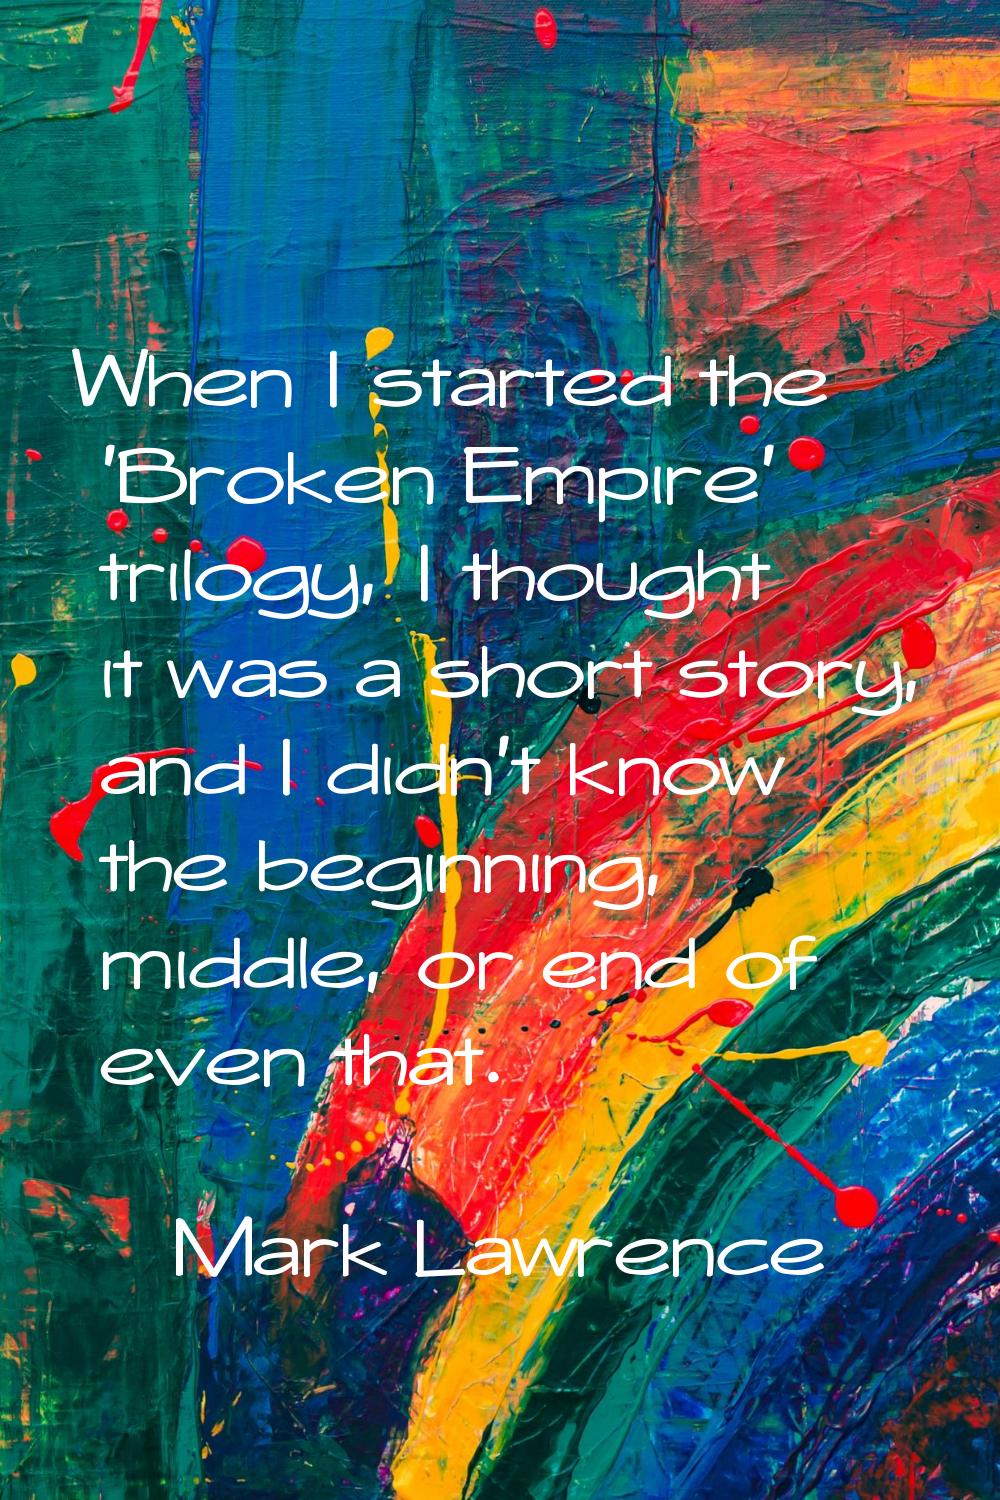 When I started the 'Broken Empire' trilogy, I thought it was a short story, and I didn't know the b